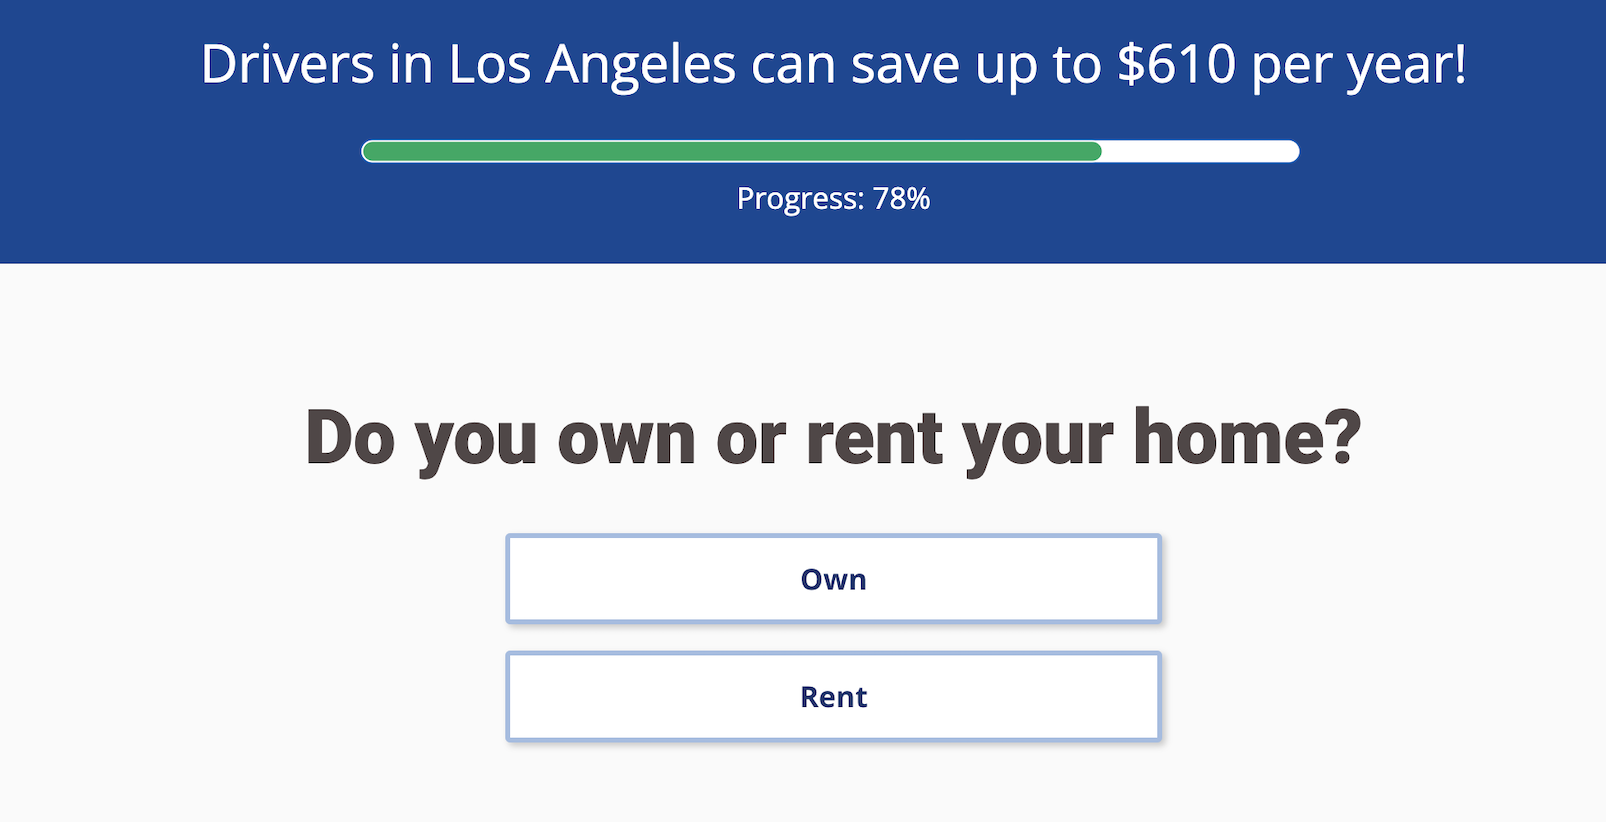 Everquote quote page asking about home ownership status